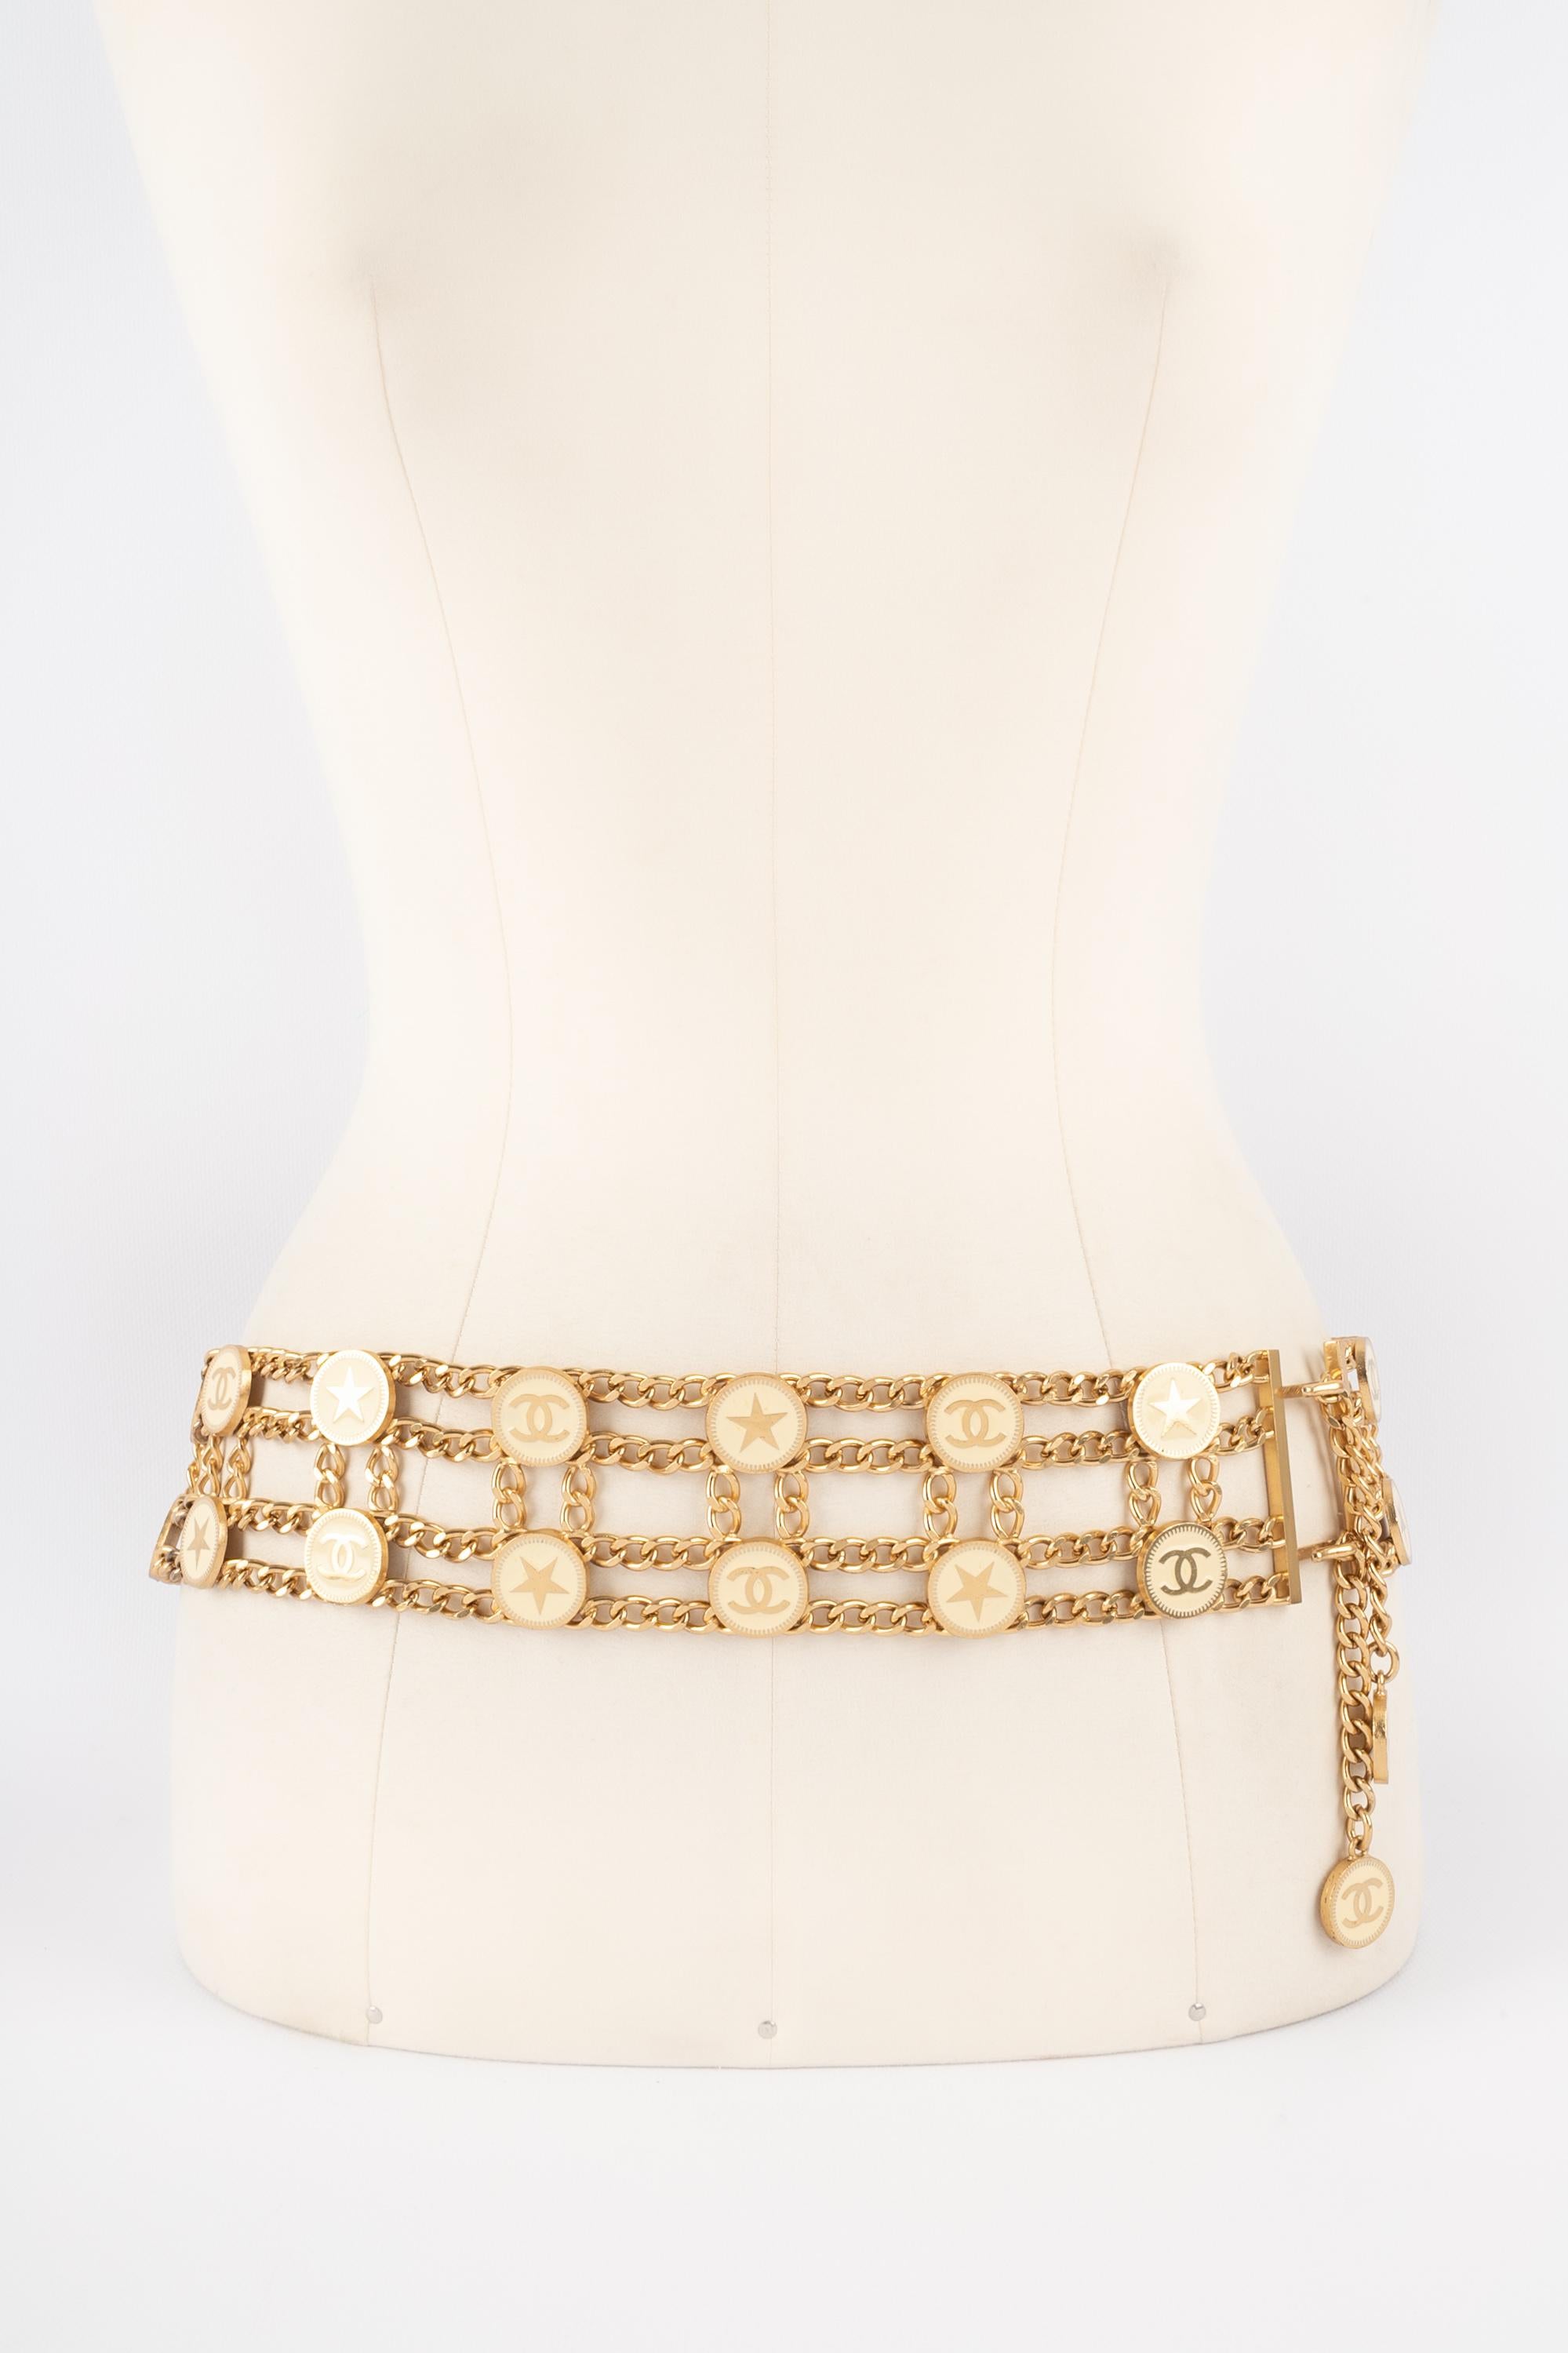 CHANEL -(Made in France) Large golden metal belt with coins enameled with beige. 2001 Spring-Summer Collection. To be mentioned, rare oxidization marks on the metal.

Condition:
Good condition

Dimensions:
Length: from 86 cm to 93 cm - Width: 5.5